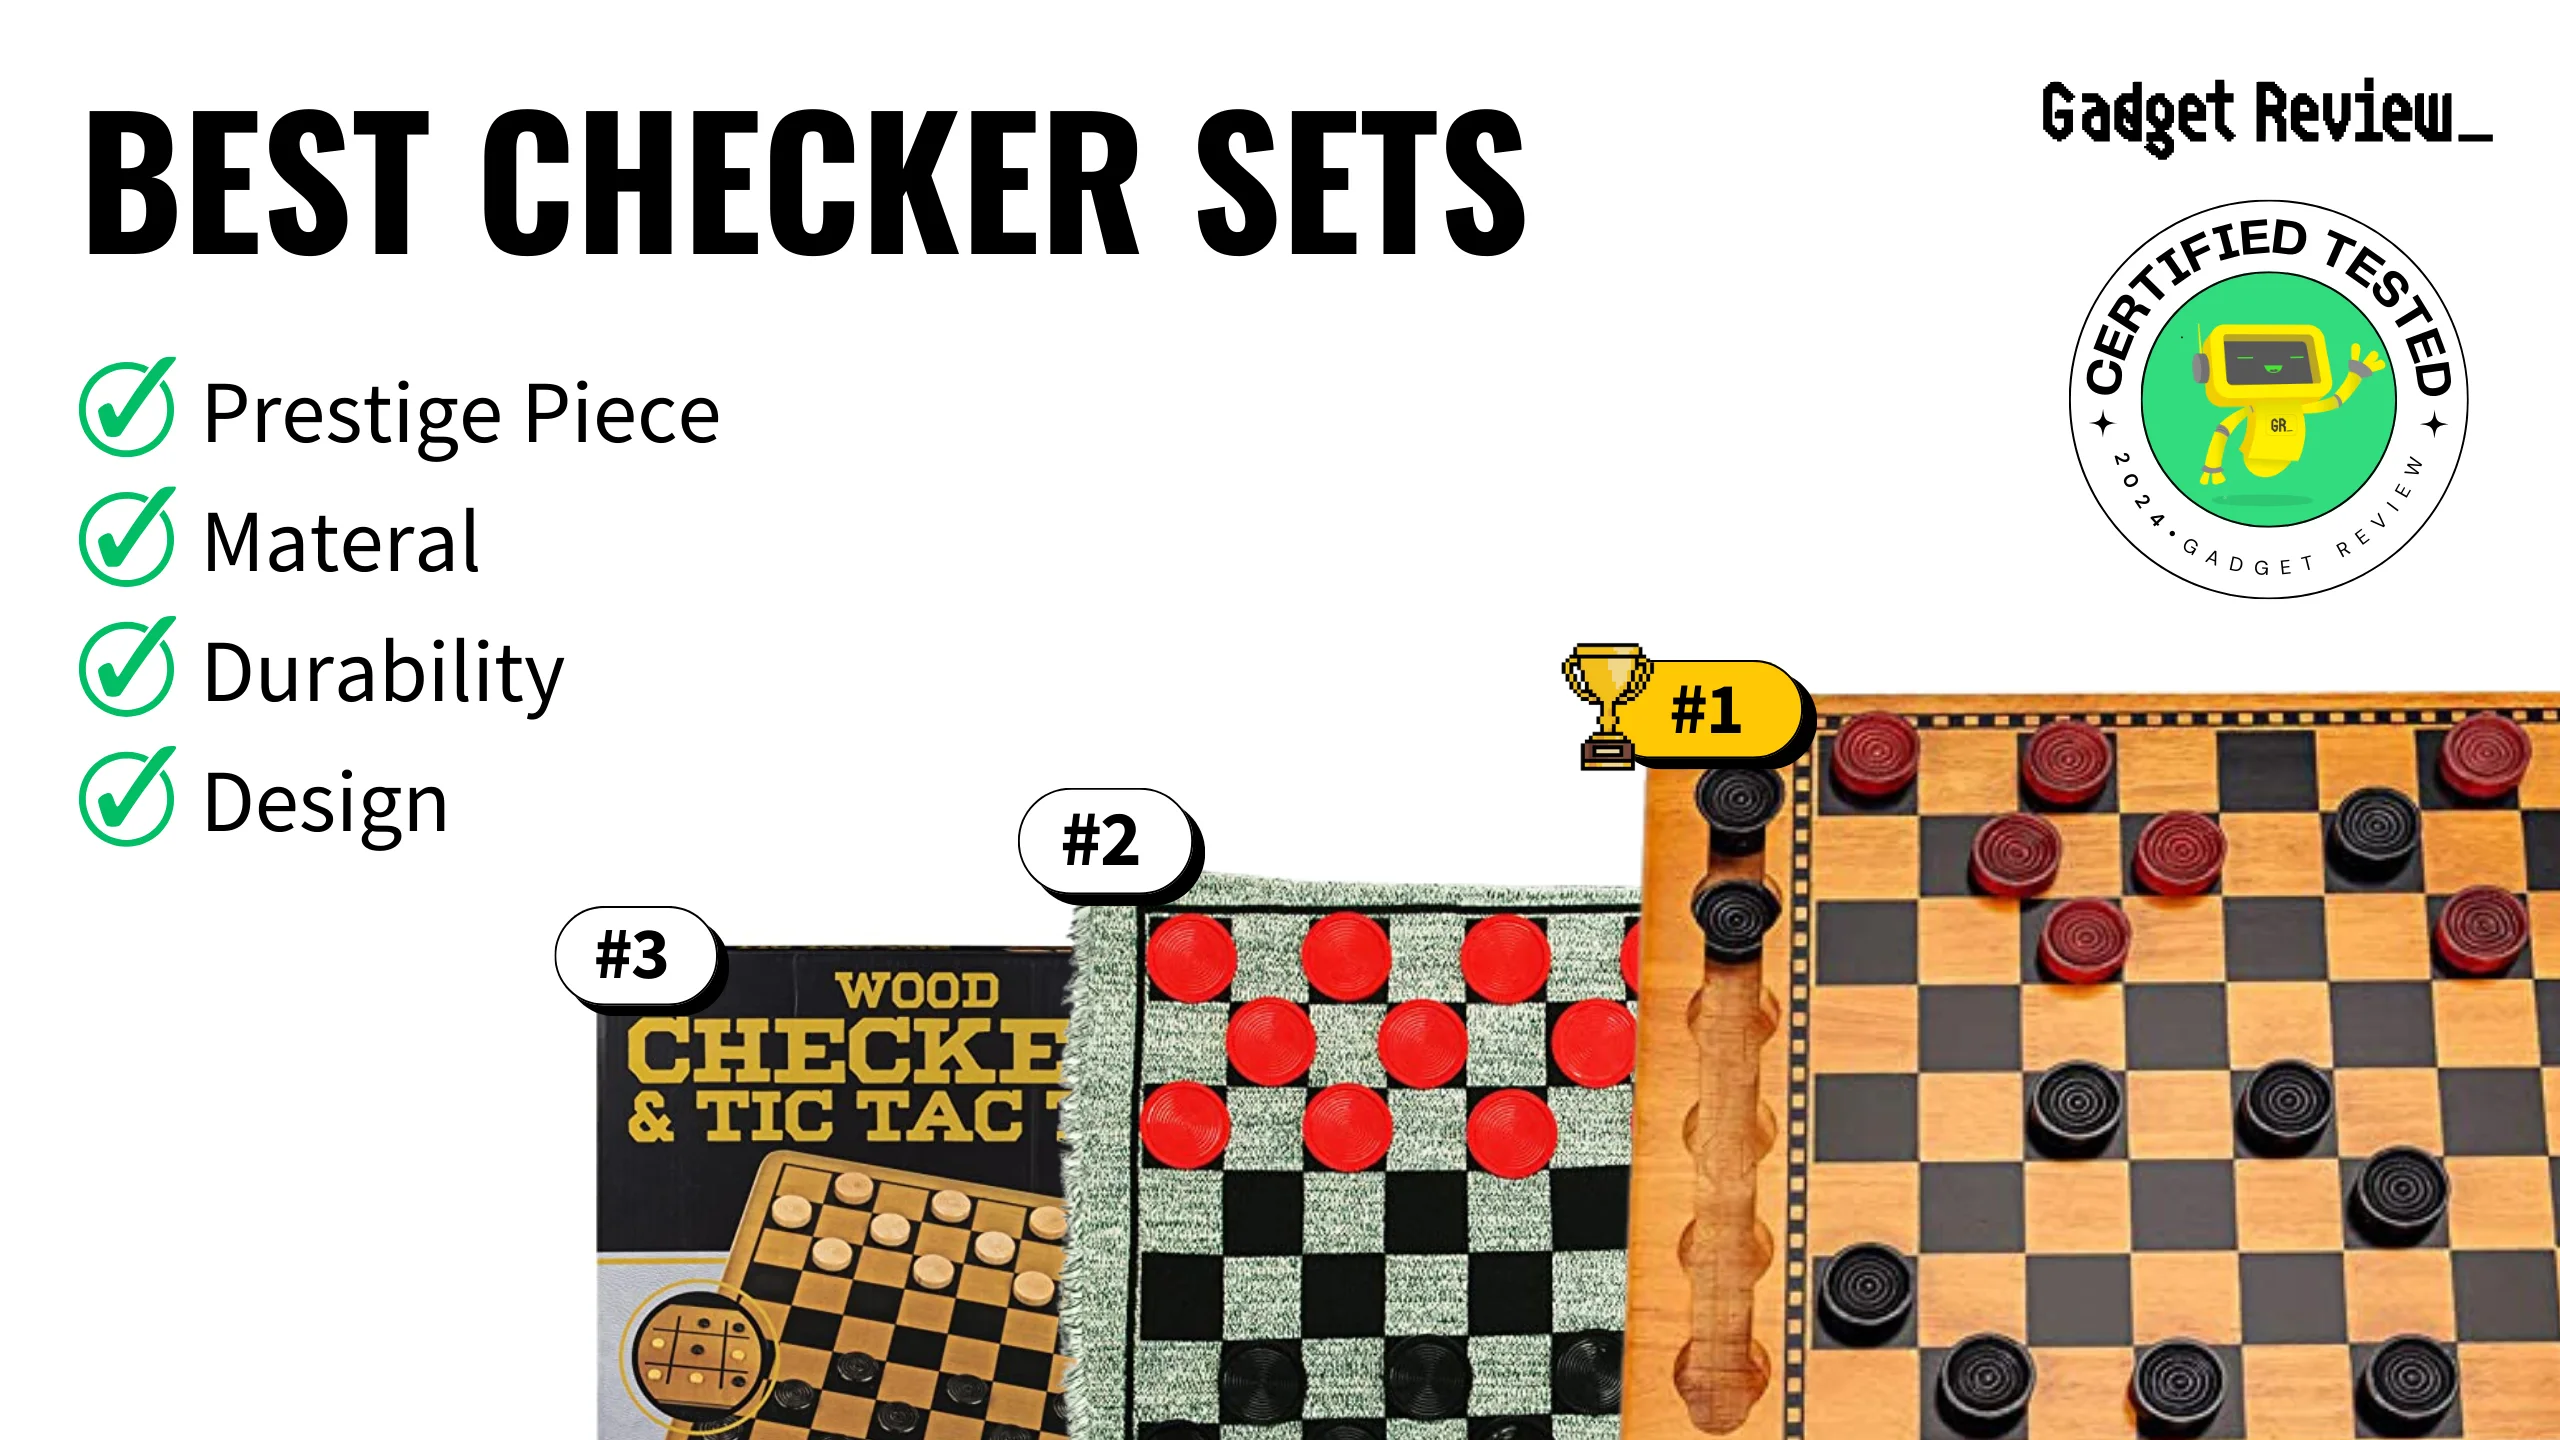 best checkers sets guide that shows the top best toys & game model